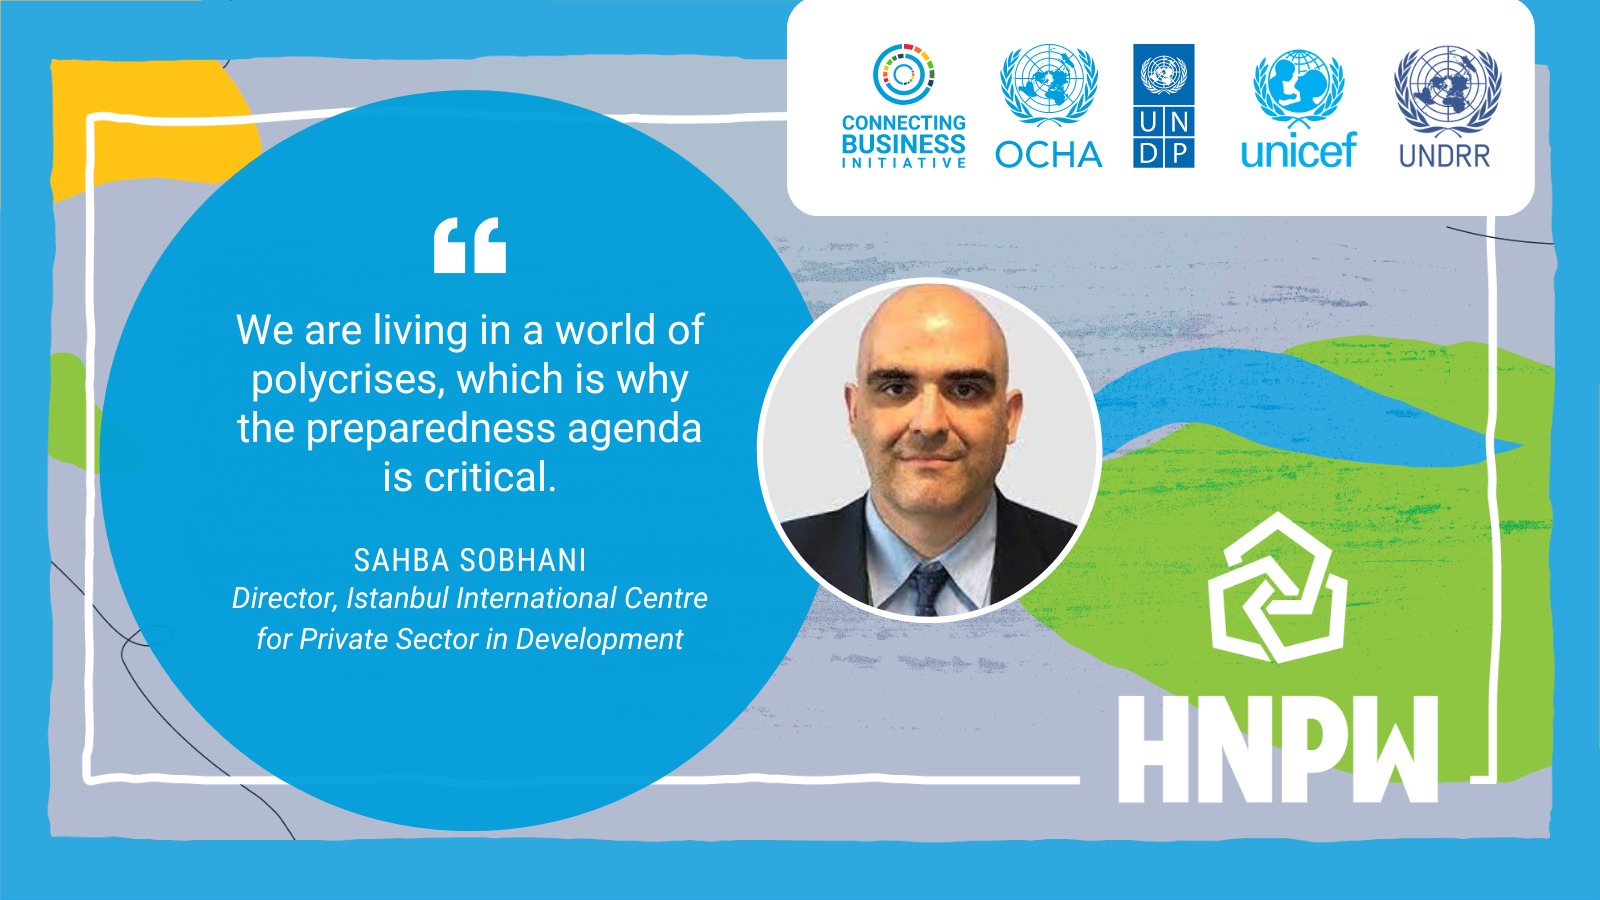 Quote from Sahba Sobhani, Director of UNDP's ICPSD